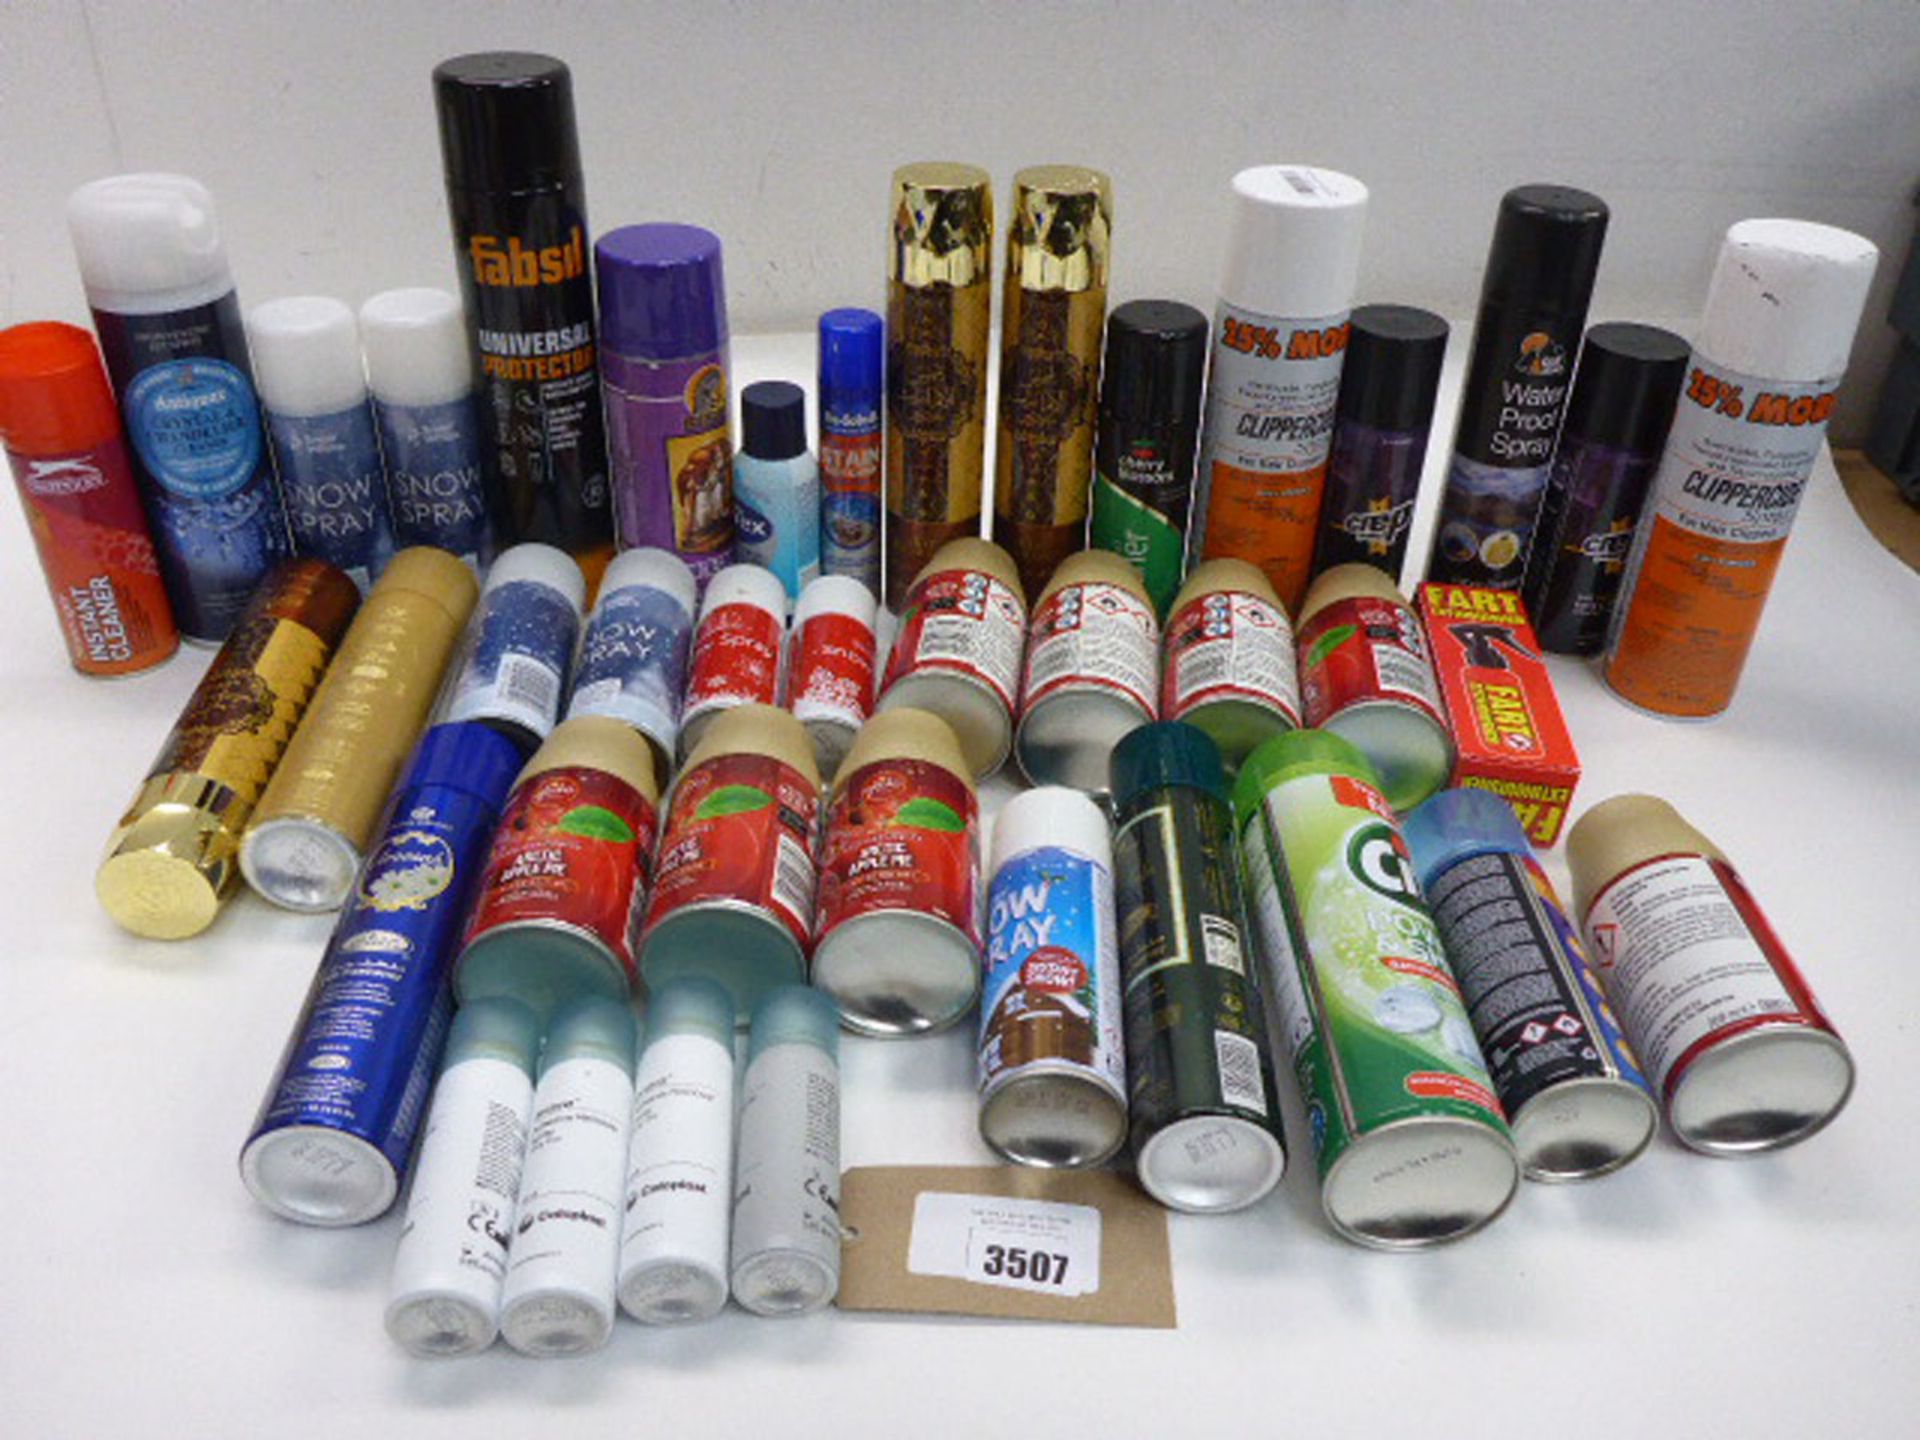 Snow sprays, air fresheners, Clippercide, water proof sprays, adhesive remover, crystal cleaner,